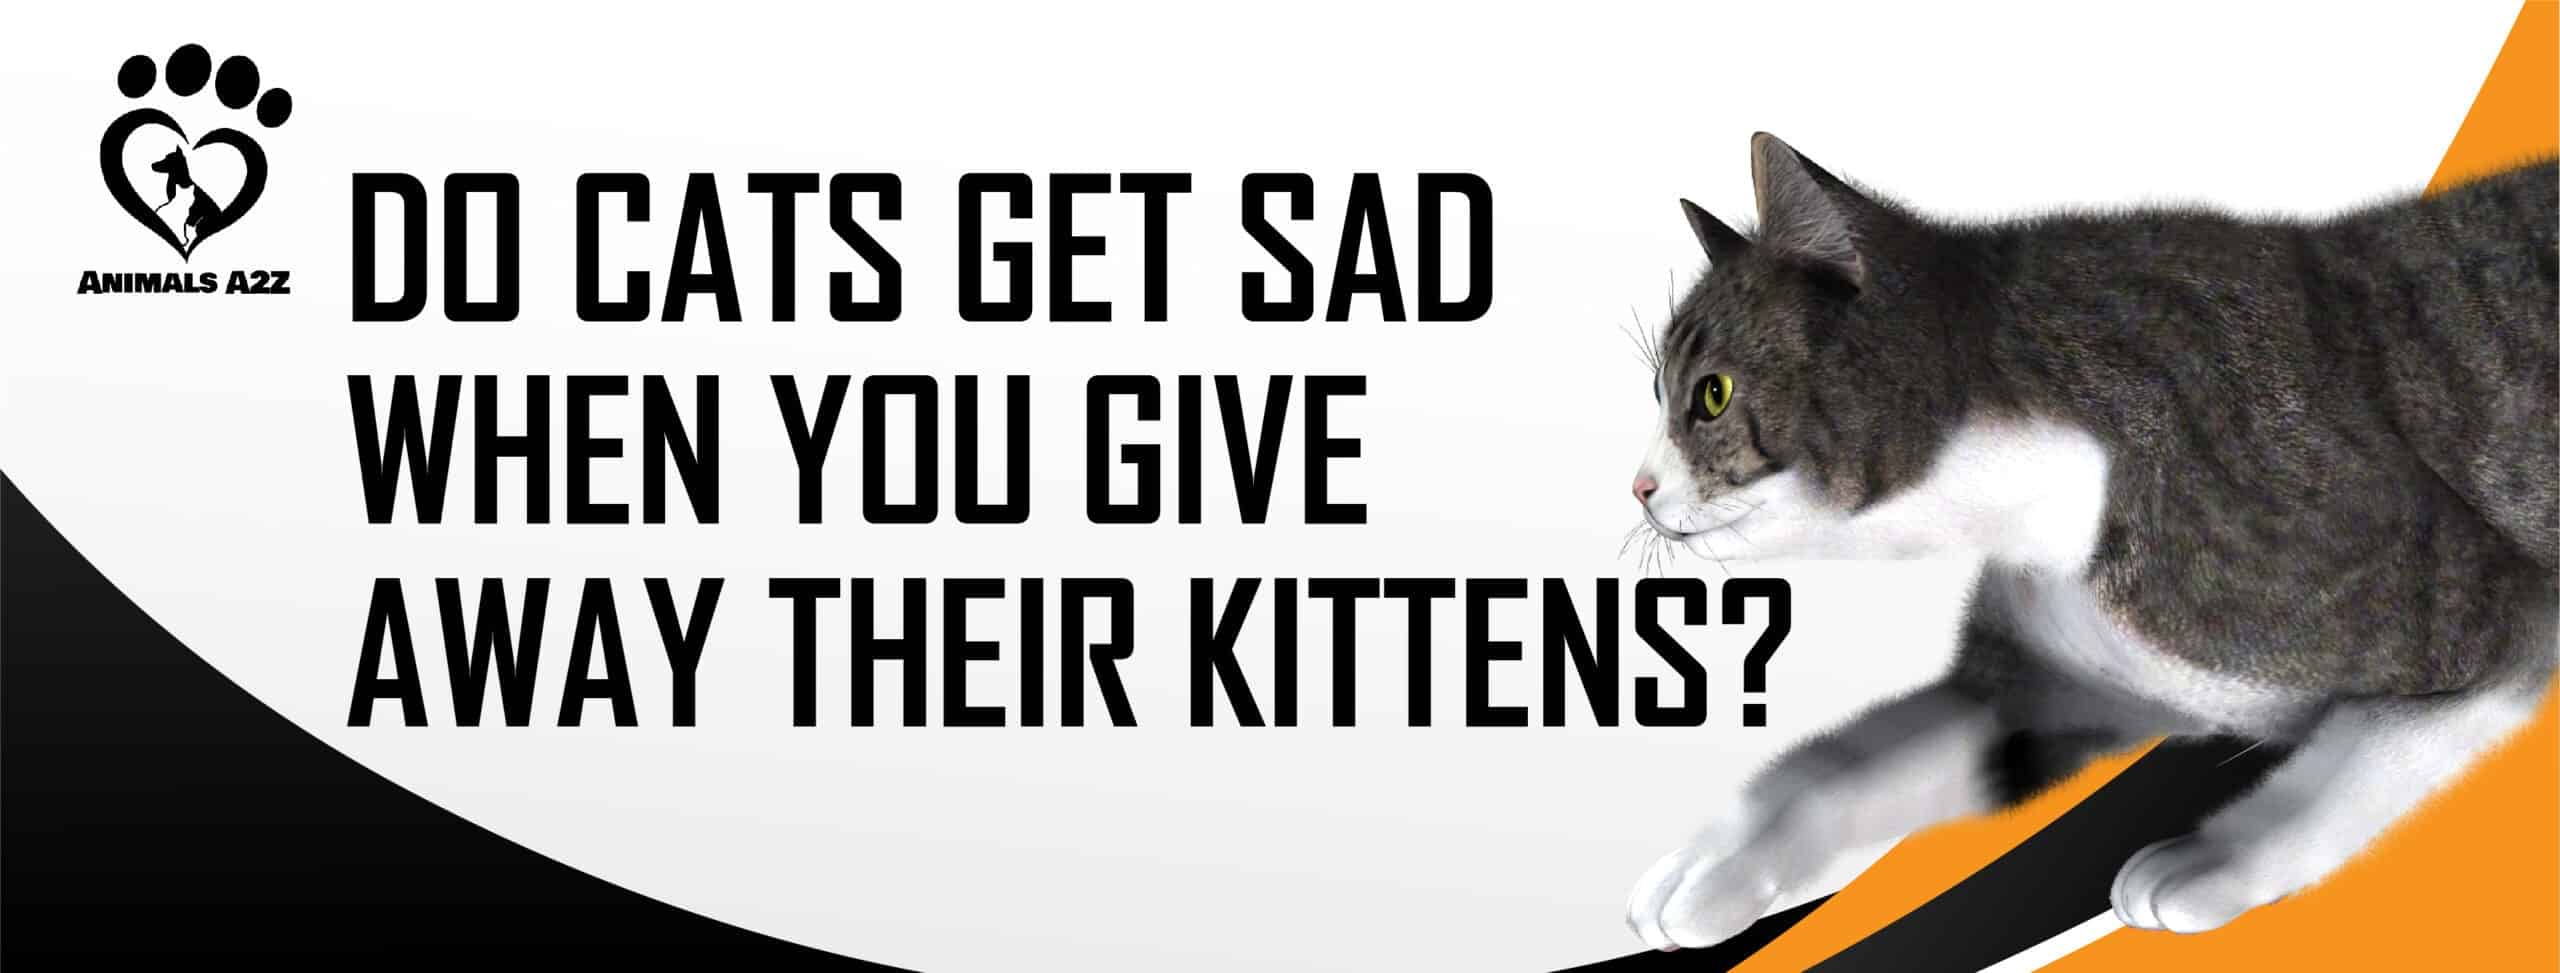 Do cats get sad when you give away their kittens